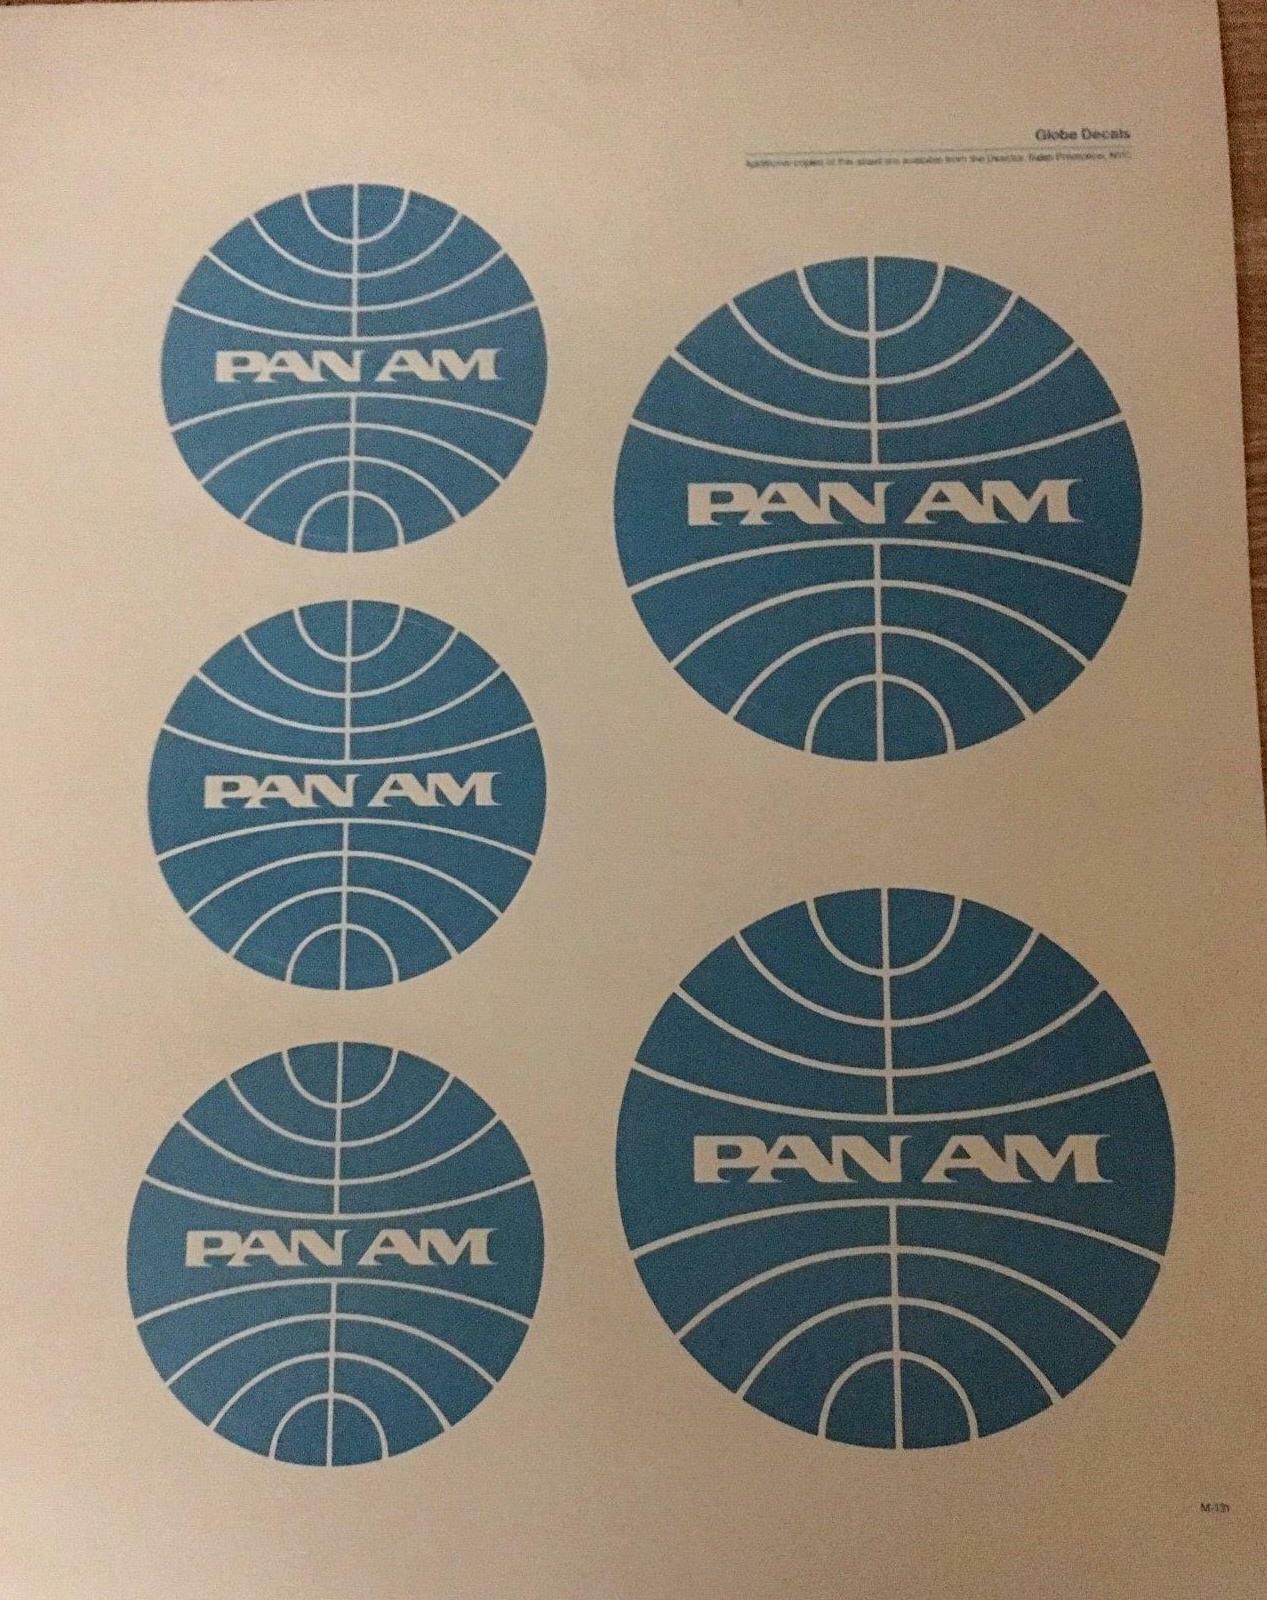 PAN AMERICAN AIRLINES VINYL STICKERS DECALS...FULL SHEET